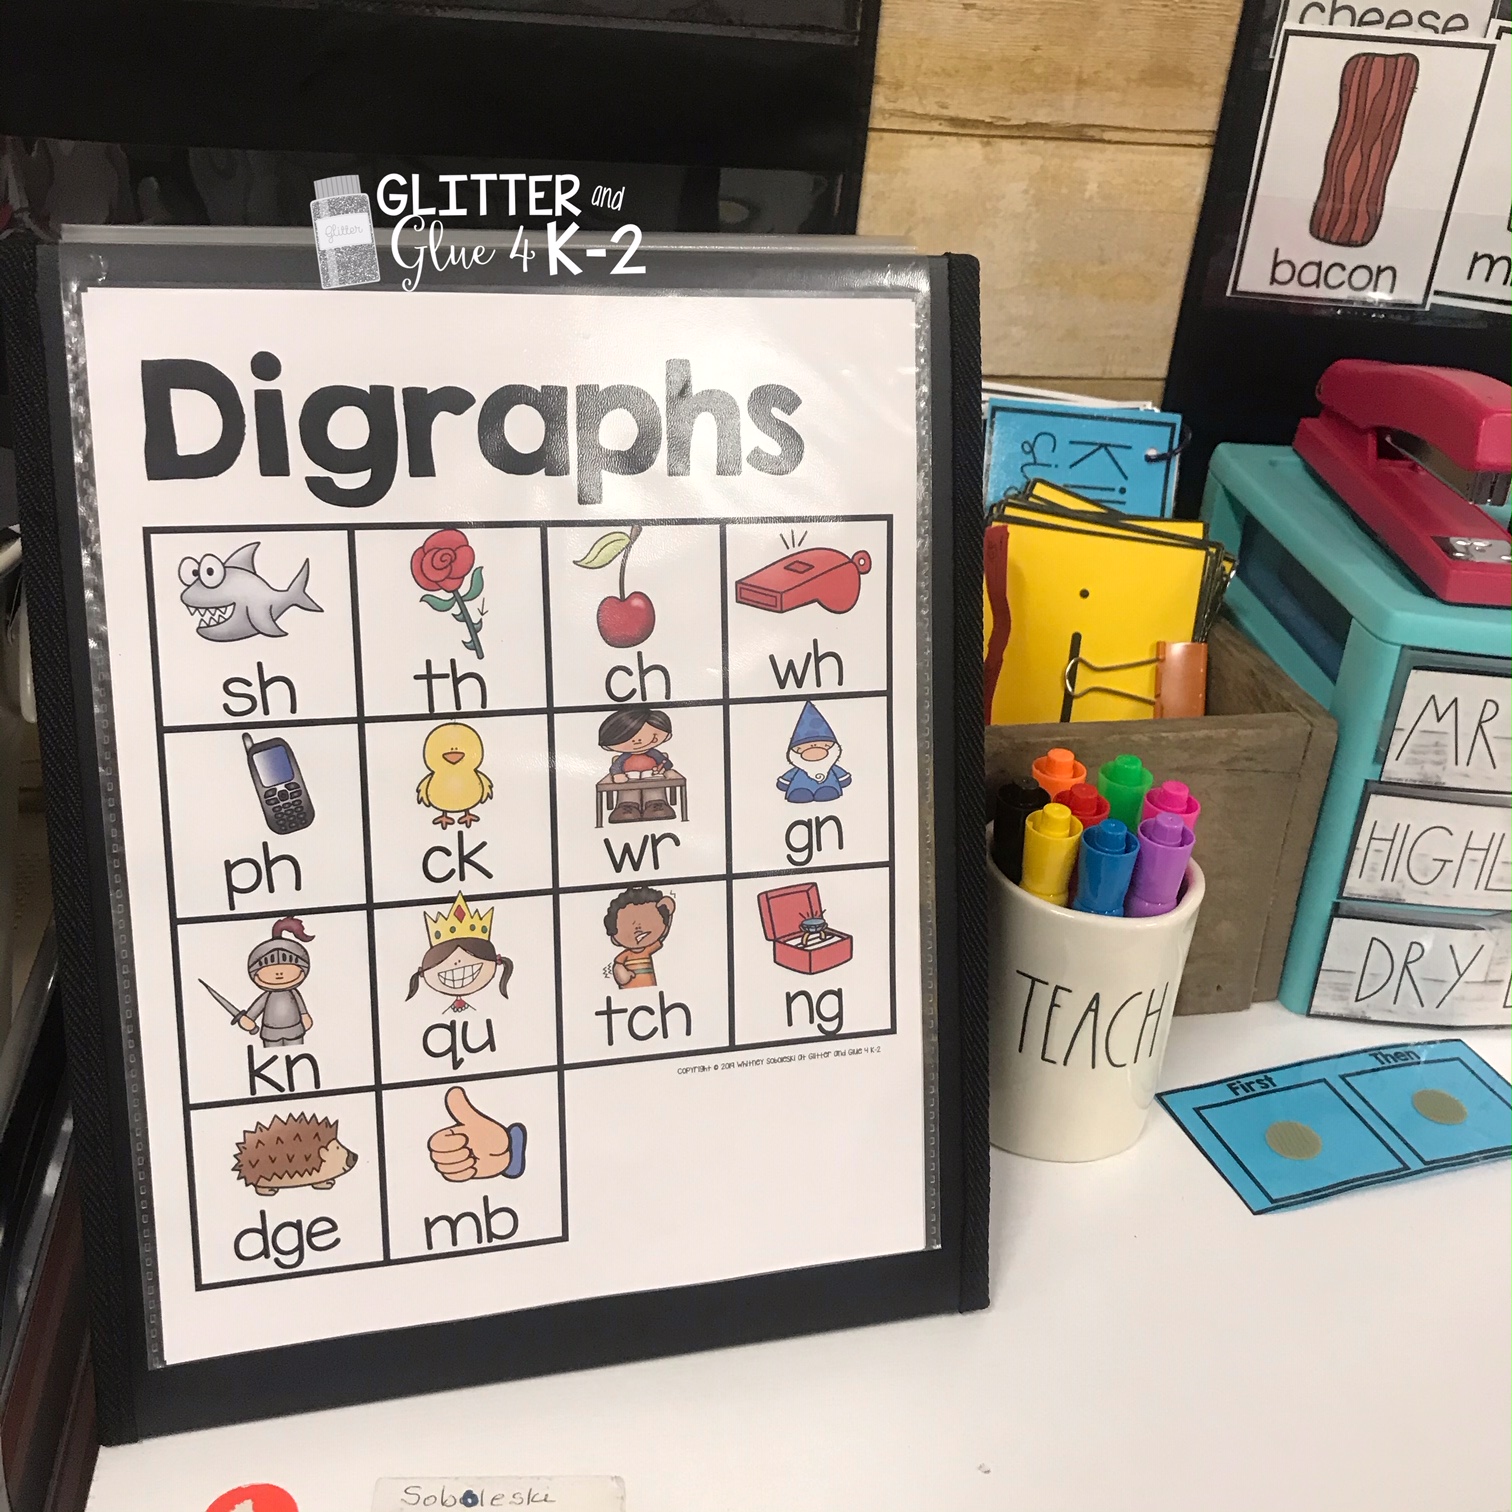 Hot Dots® Phonics Set 4: Blends And Digraphs – Steps to Literacy